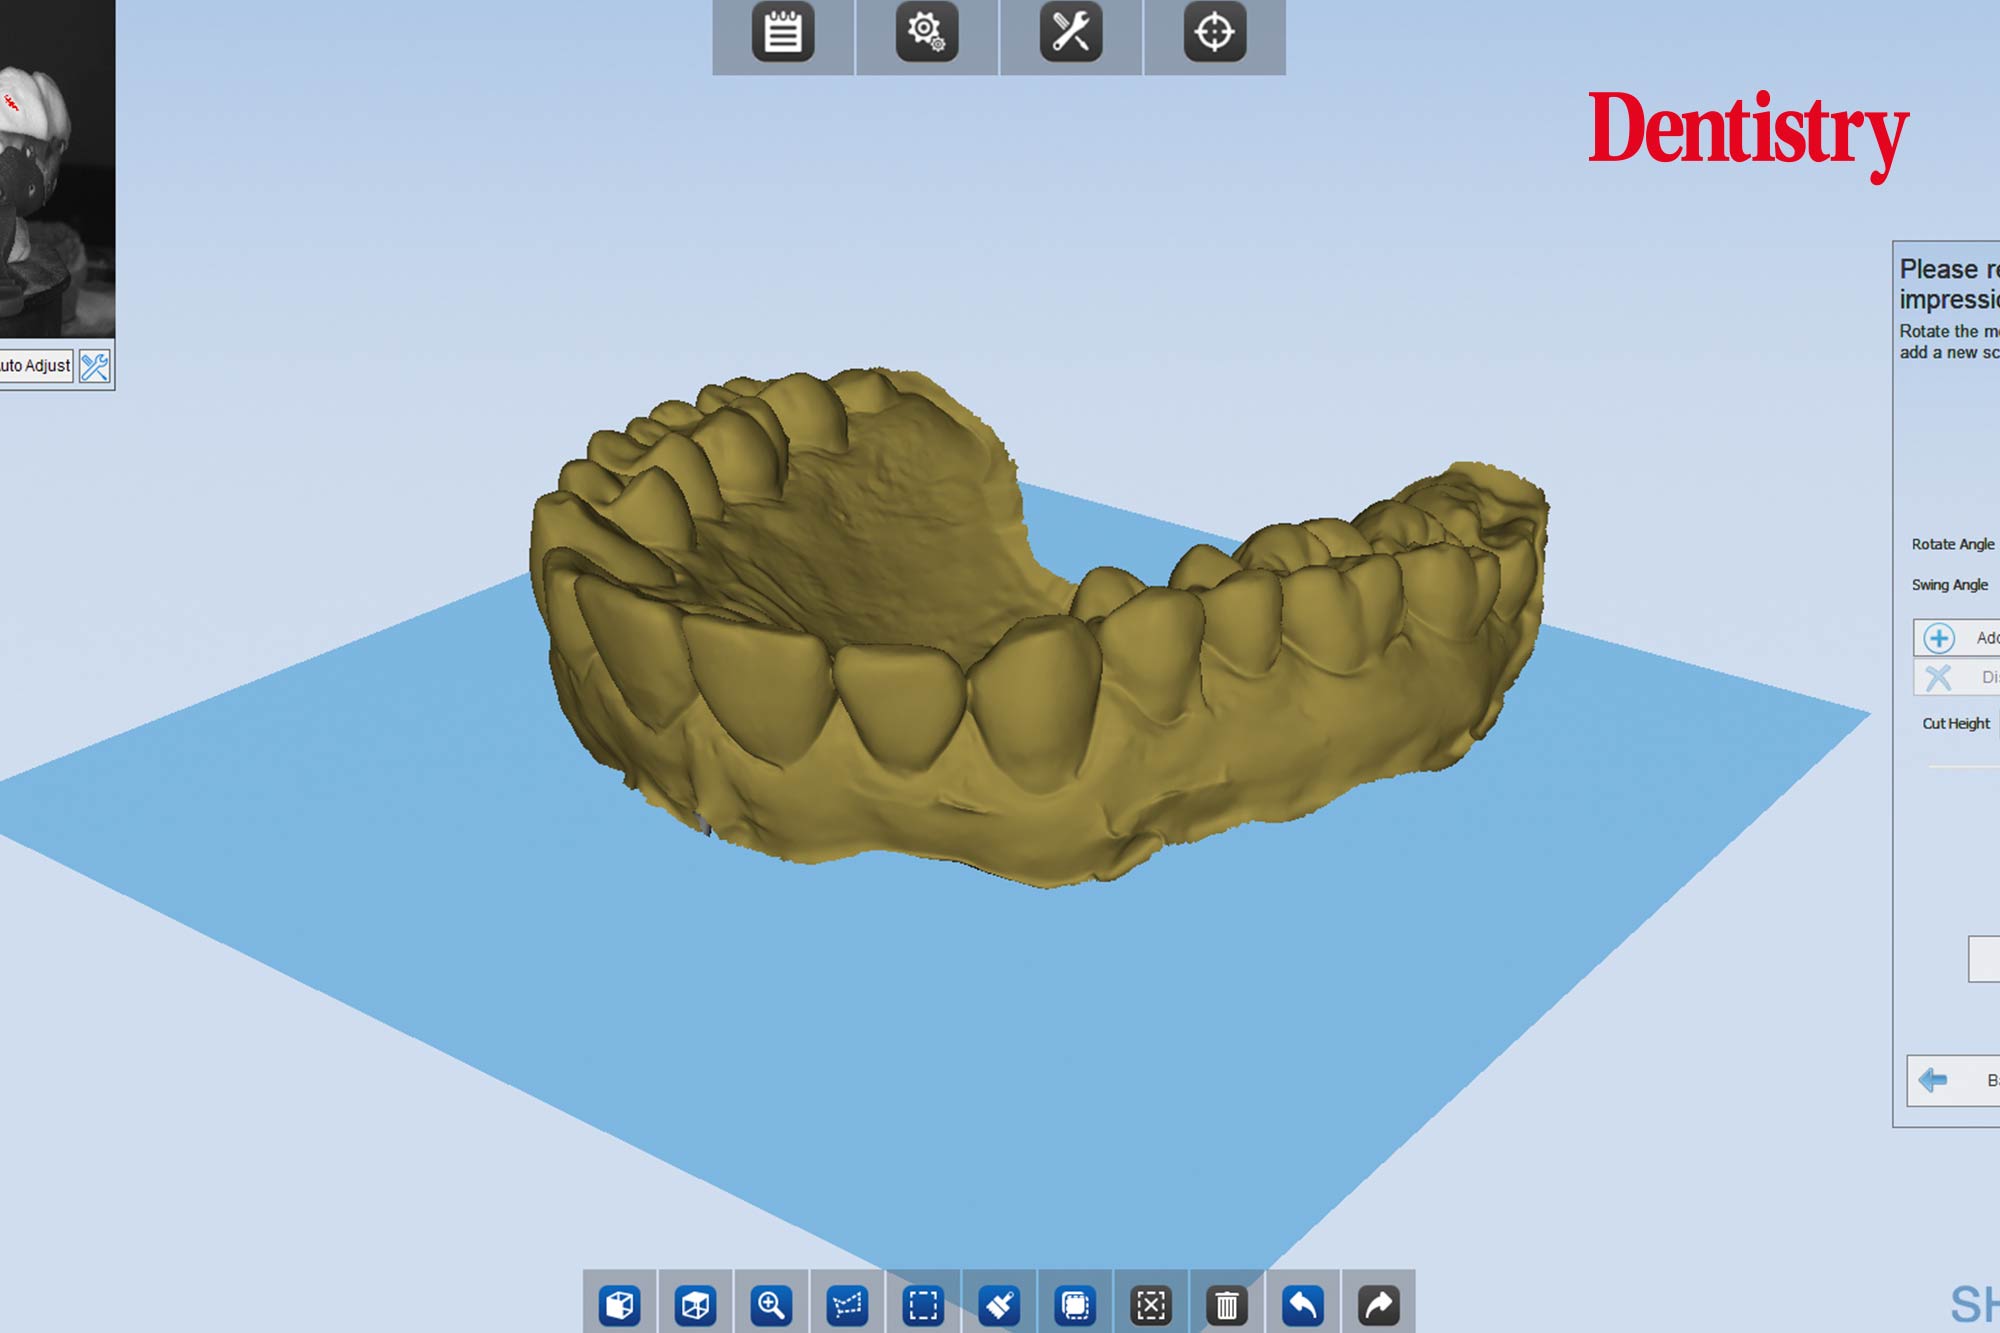 Andre Gaul RDT gives a step-by-step overview of the design and fabrication process of printed occlusal splints.